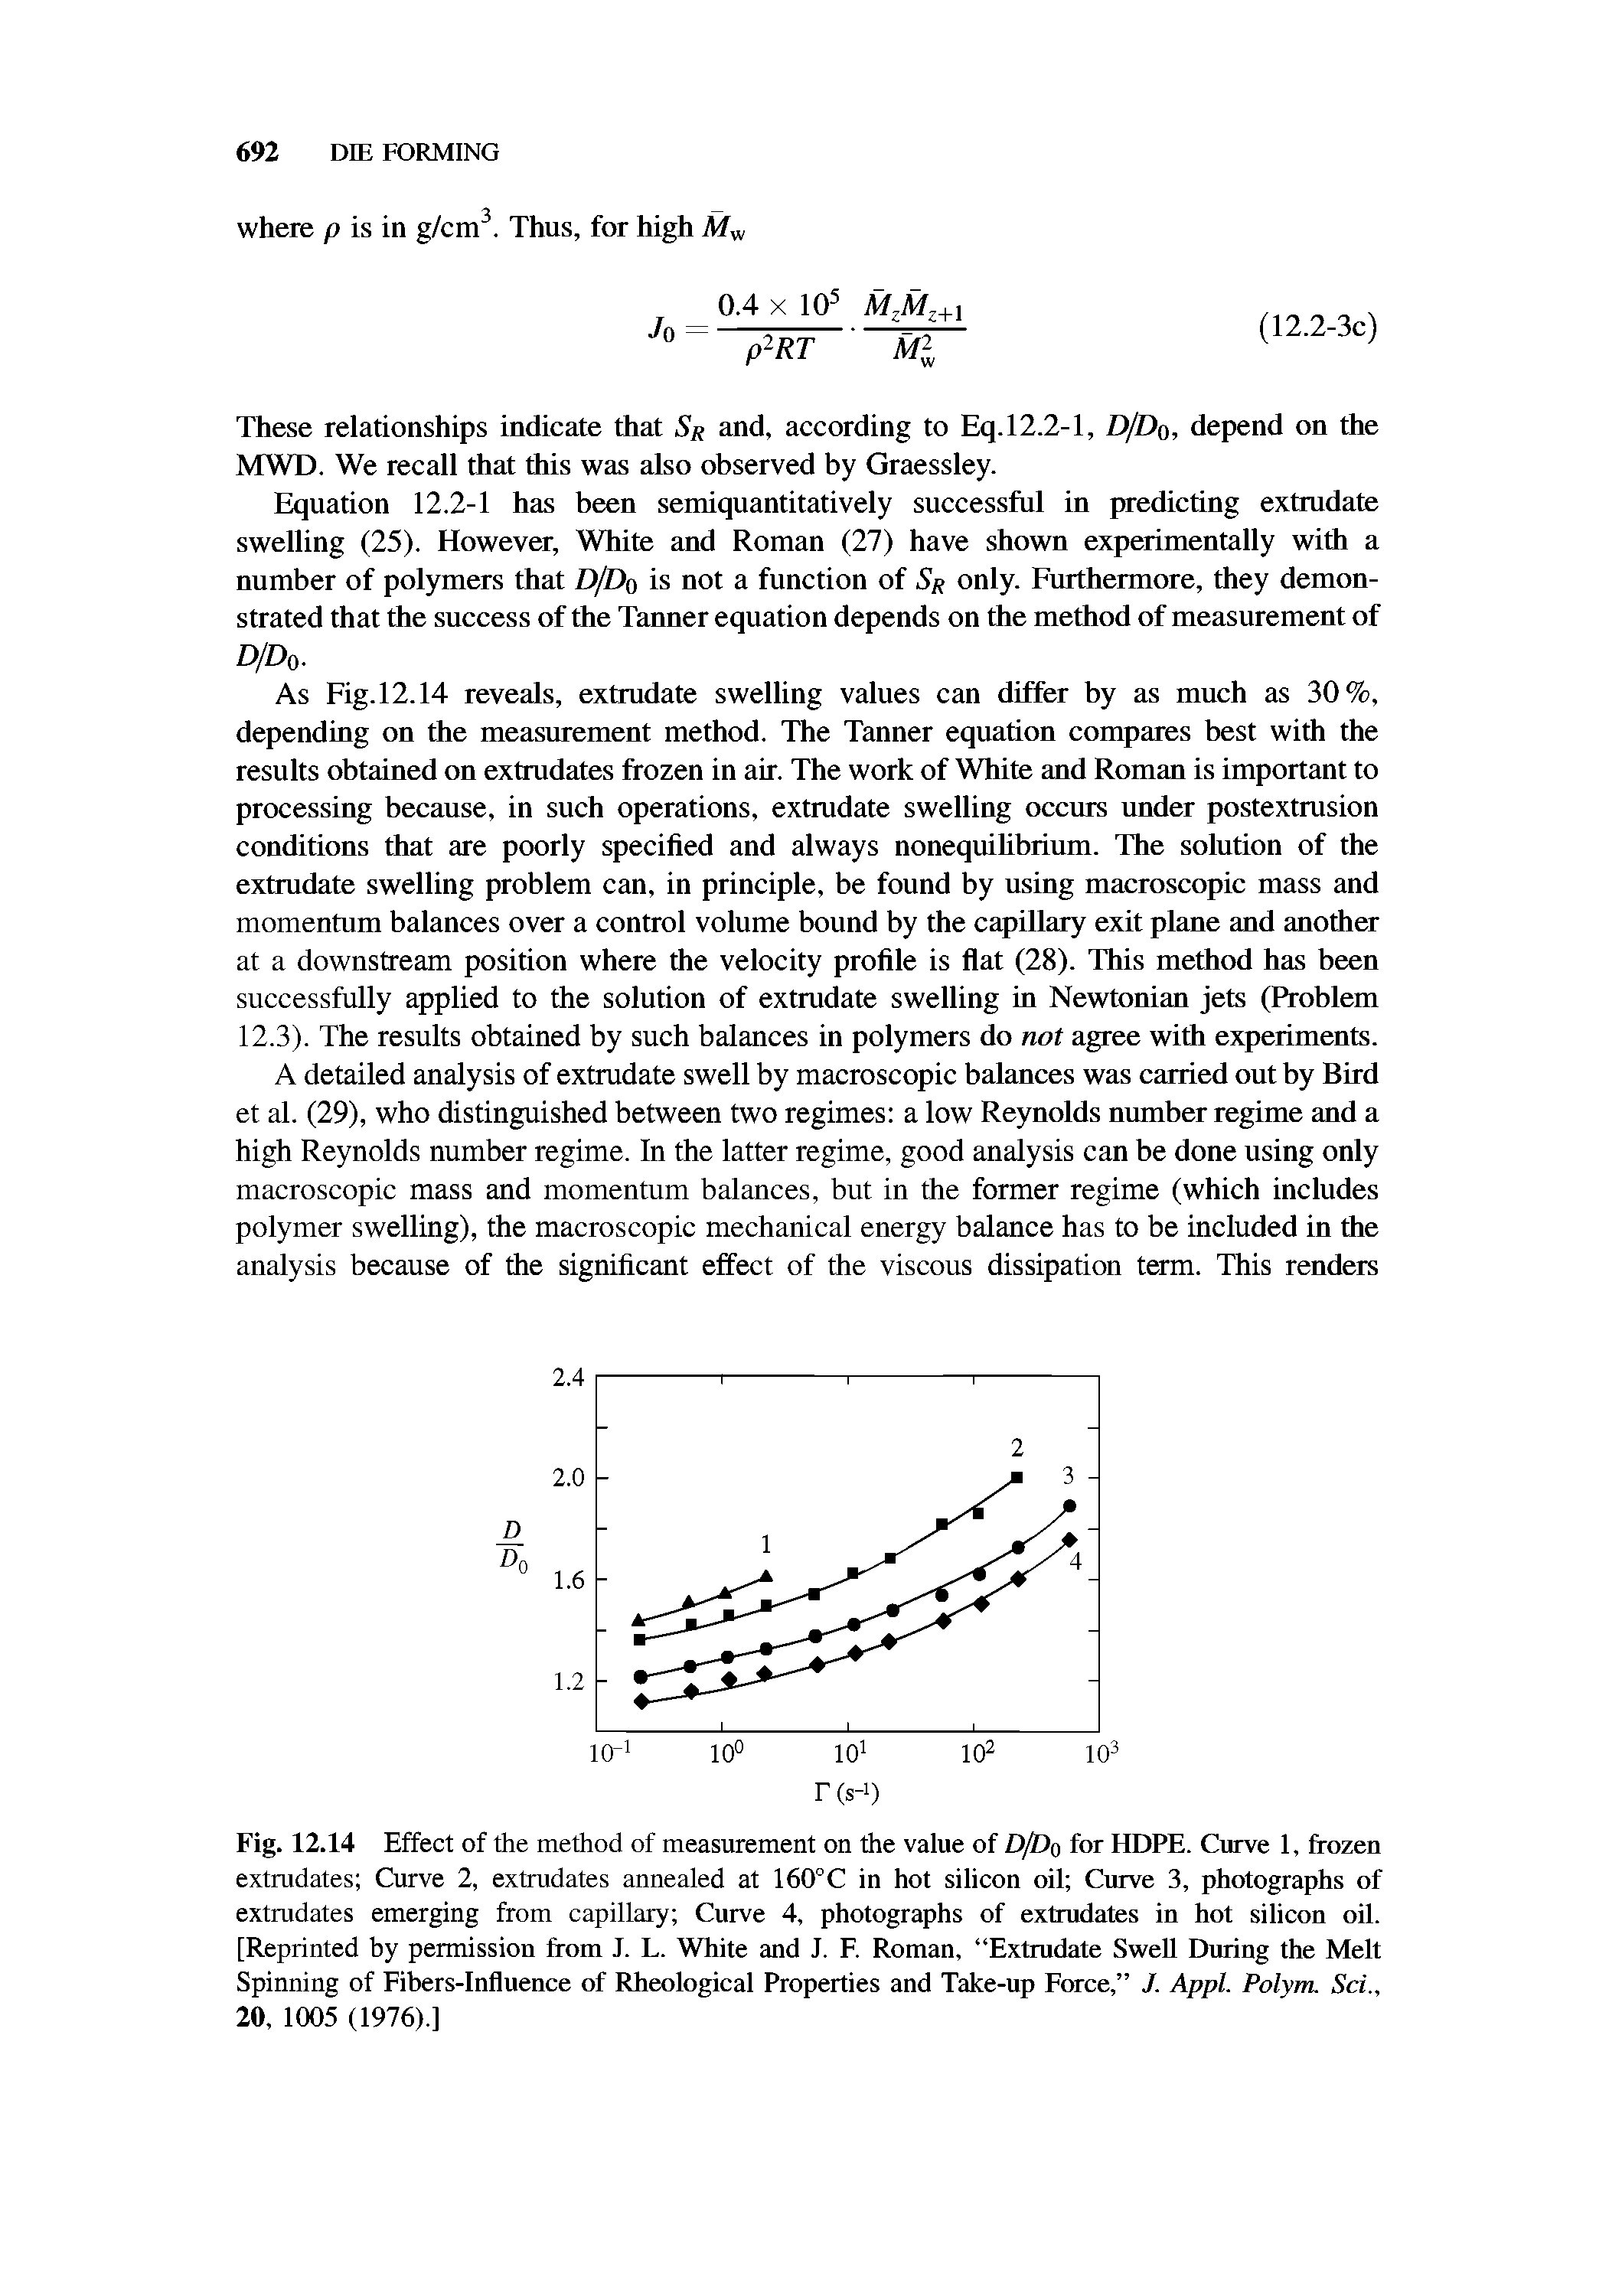 Fig. 12.14 Effect of the method of measurement on the value of D/Do for HDPE. Curve 1, frozen extrudates Curve 2, extrudates annealed at 160°C in hot silicon oil Curve 3, photographs of extrudates emerging from capillary Curve 4, photographs of extrudates in hot silicon oil. [Reprinted by permission from J. L. White and J. F. Roman, Extrudate Swell During the Melt Spinning of Fibers-Influence of Rheological Properties and Take-up Force, J. Appl. Polym. Sci., 20, 1005 (1976).]...